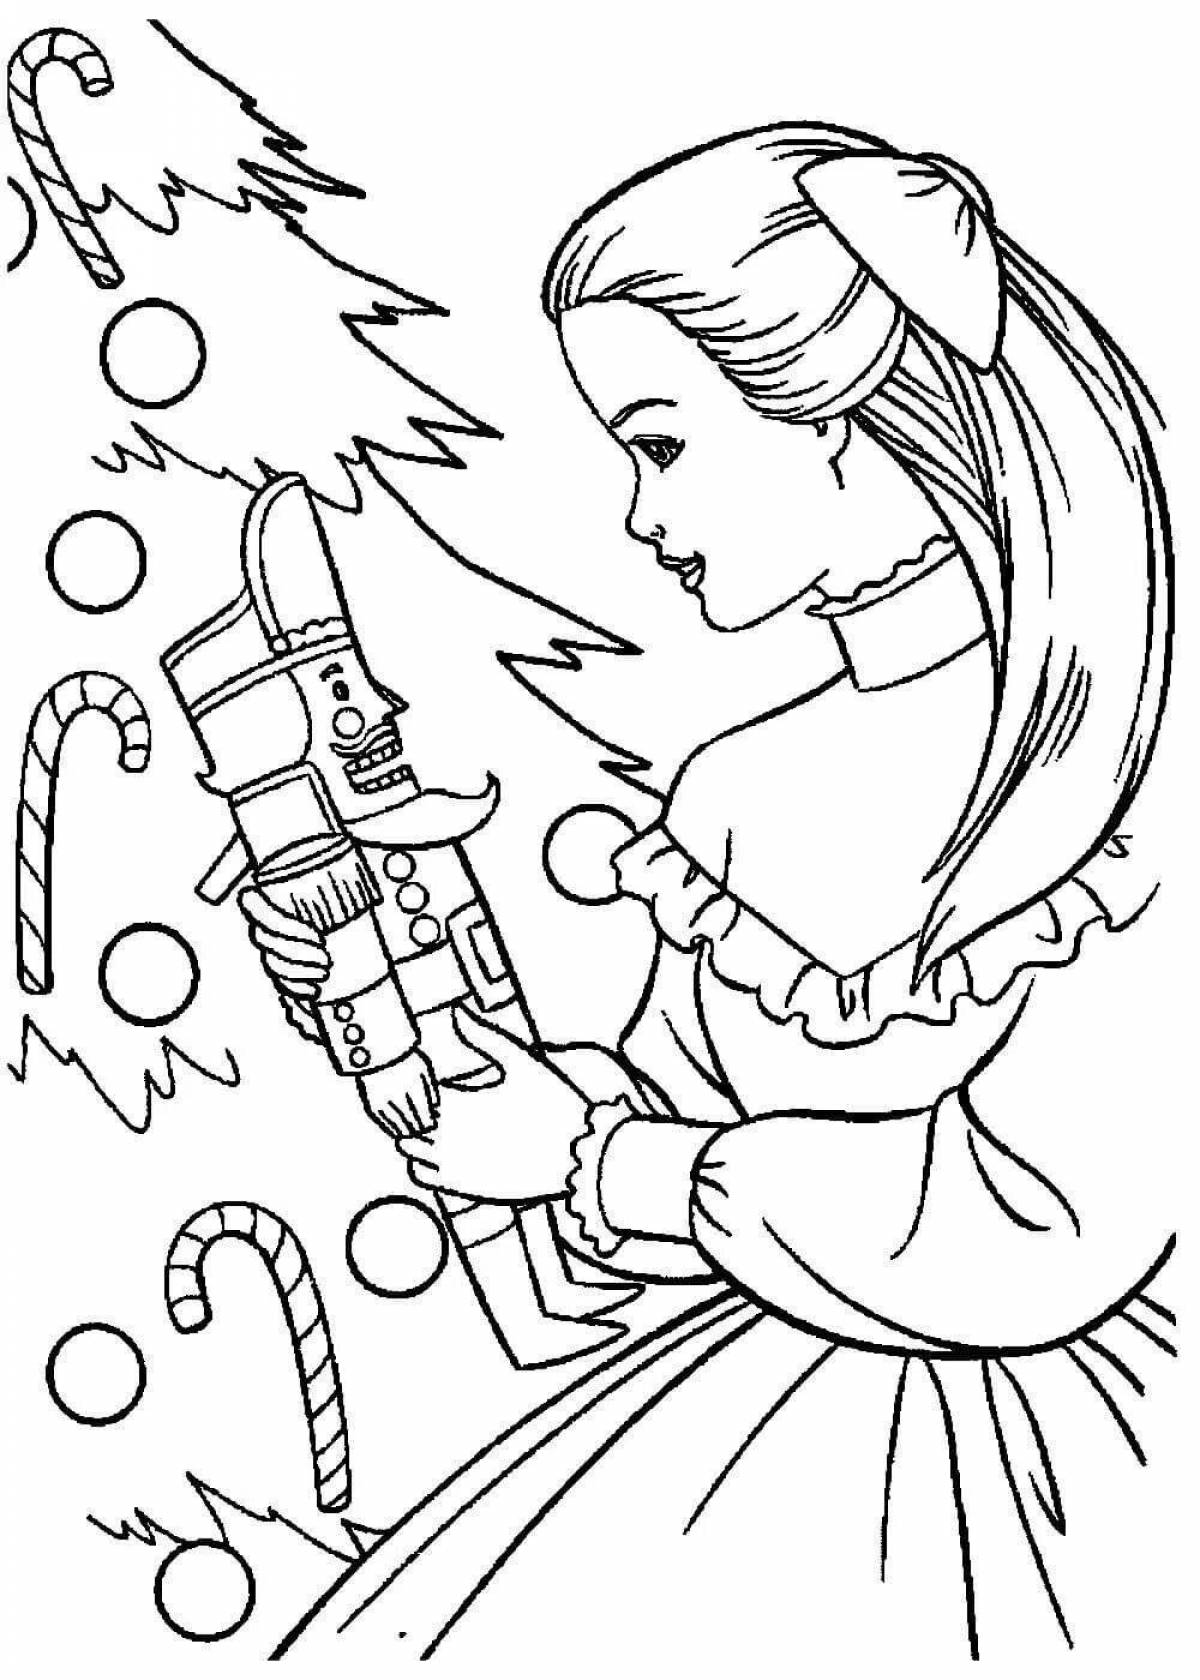 Luminous Nutcracker and Mouse King coloring page